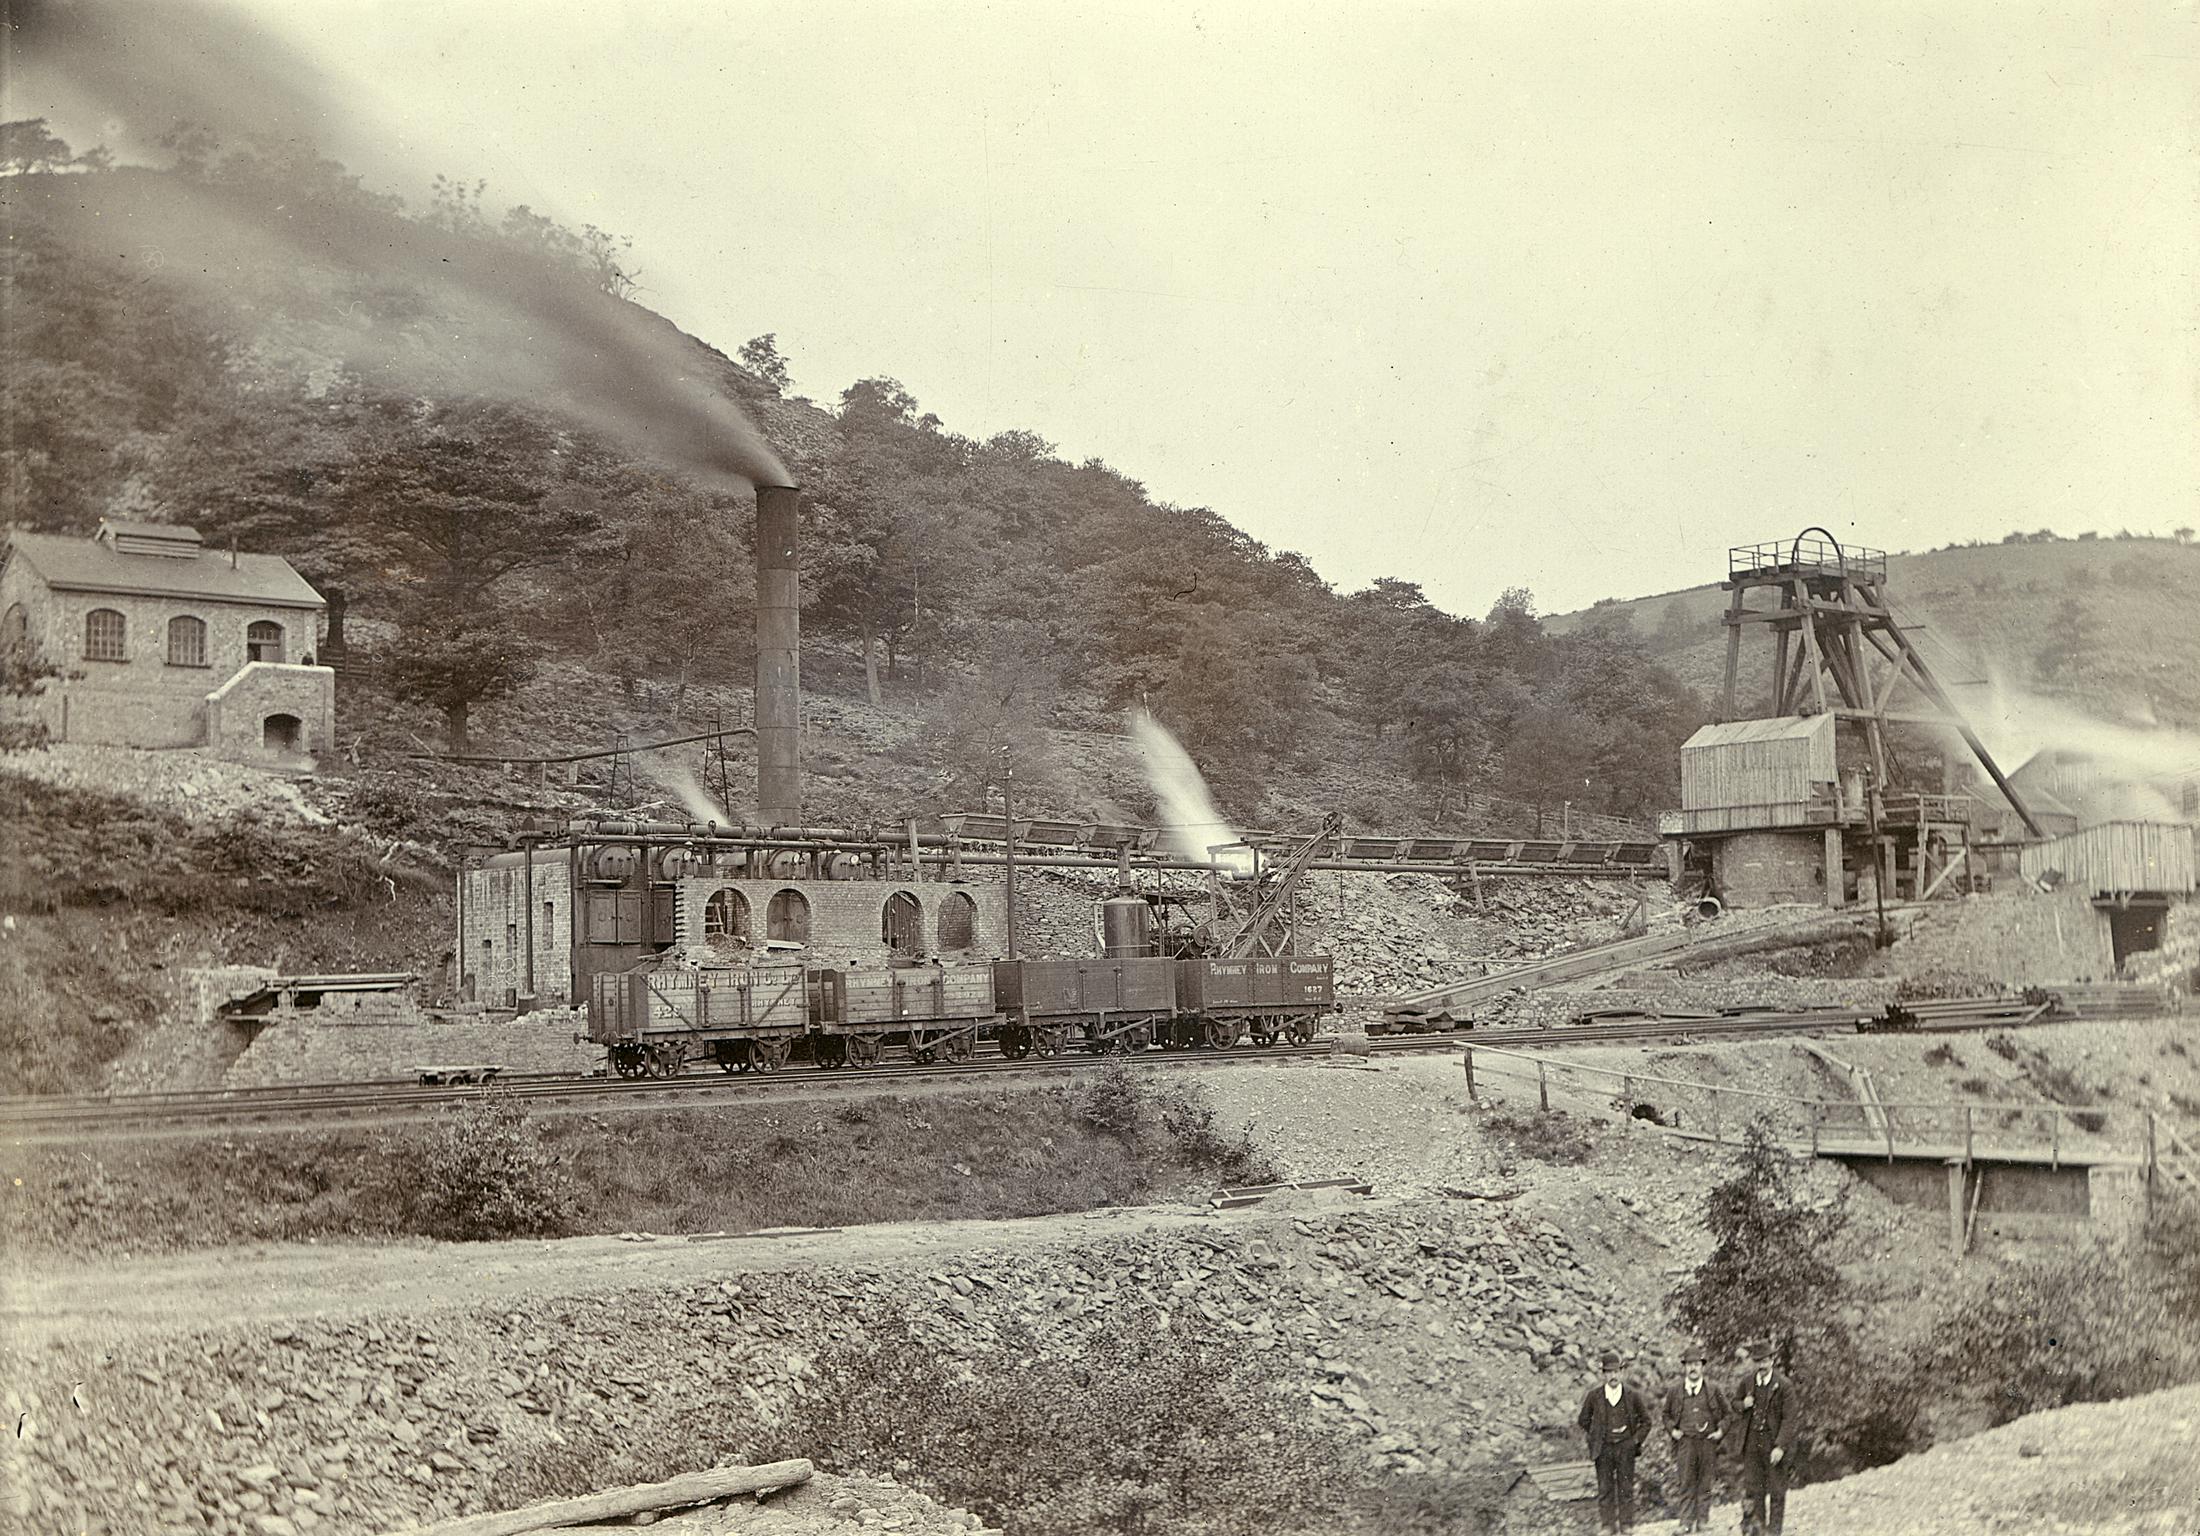 Groesfaen Colliery, photograph